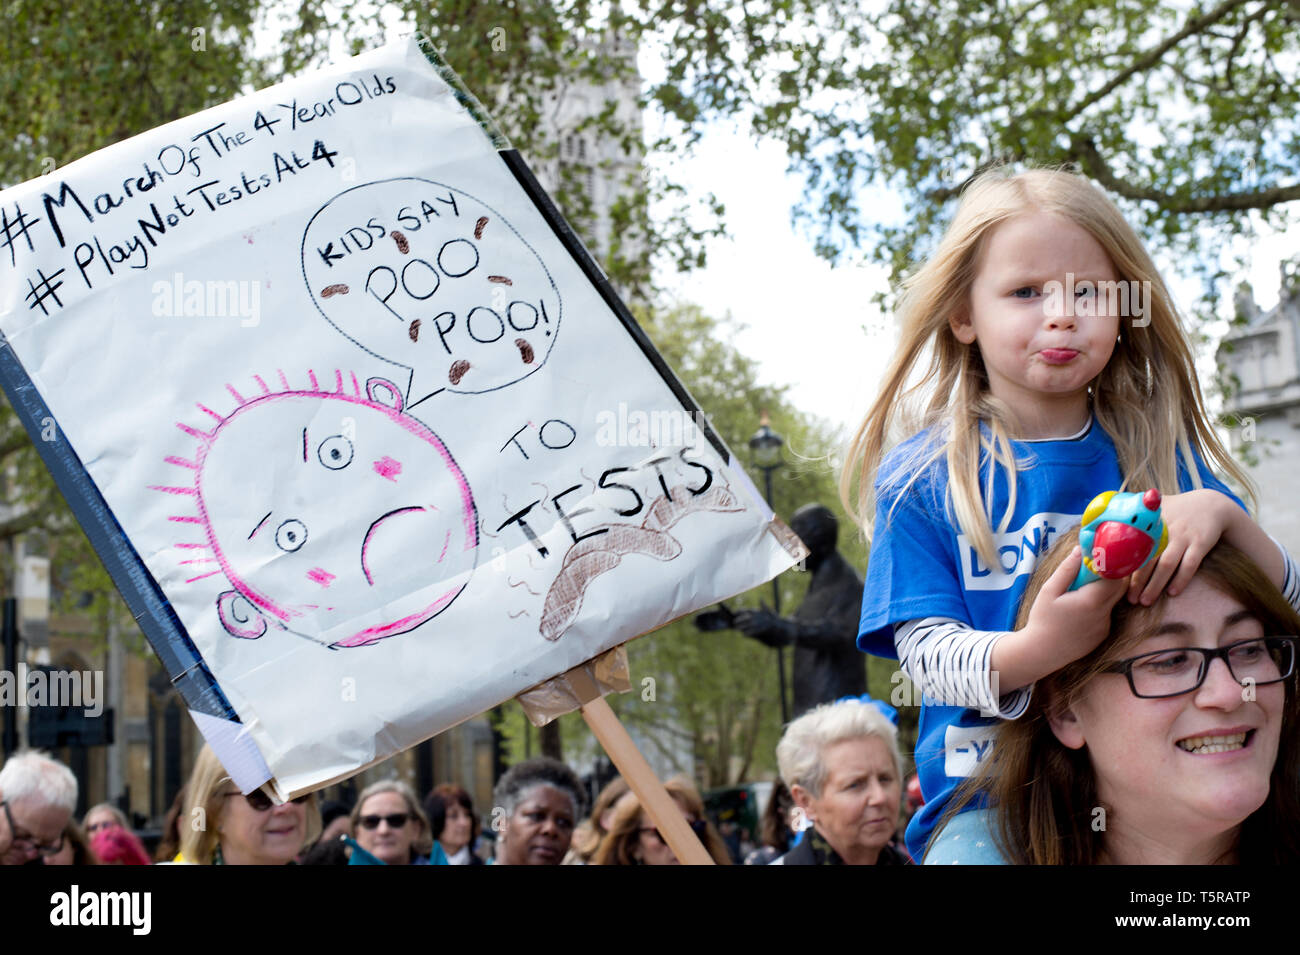 Westminster April 25th 2019. 'March of the four year olds', a protest against testing organised by 'More than a score'. Angela Roy with her 3 year old Stock Photo